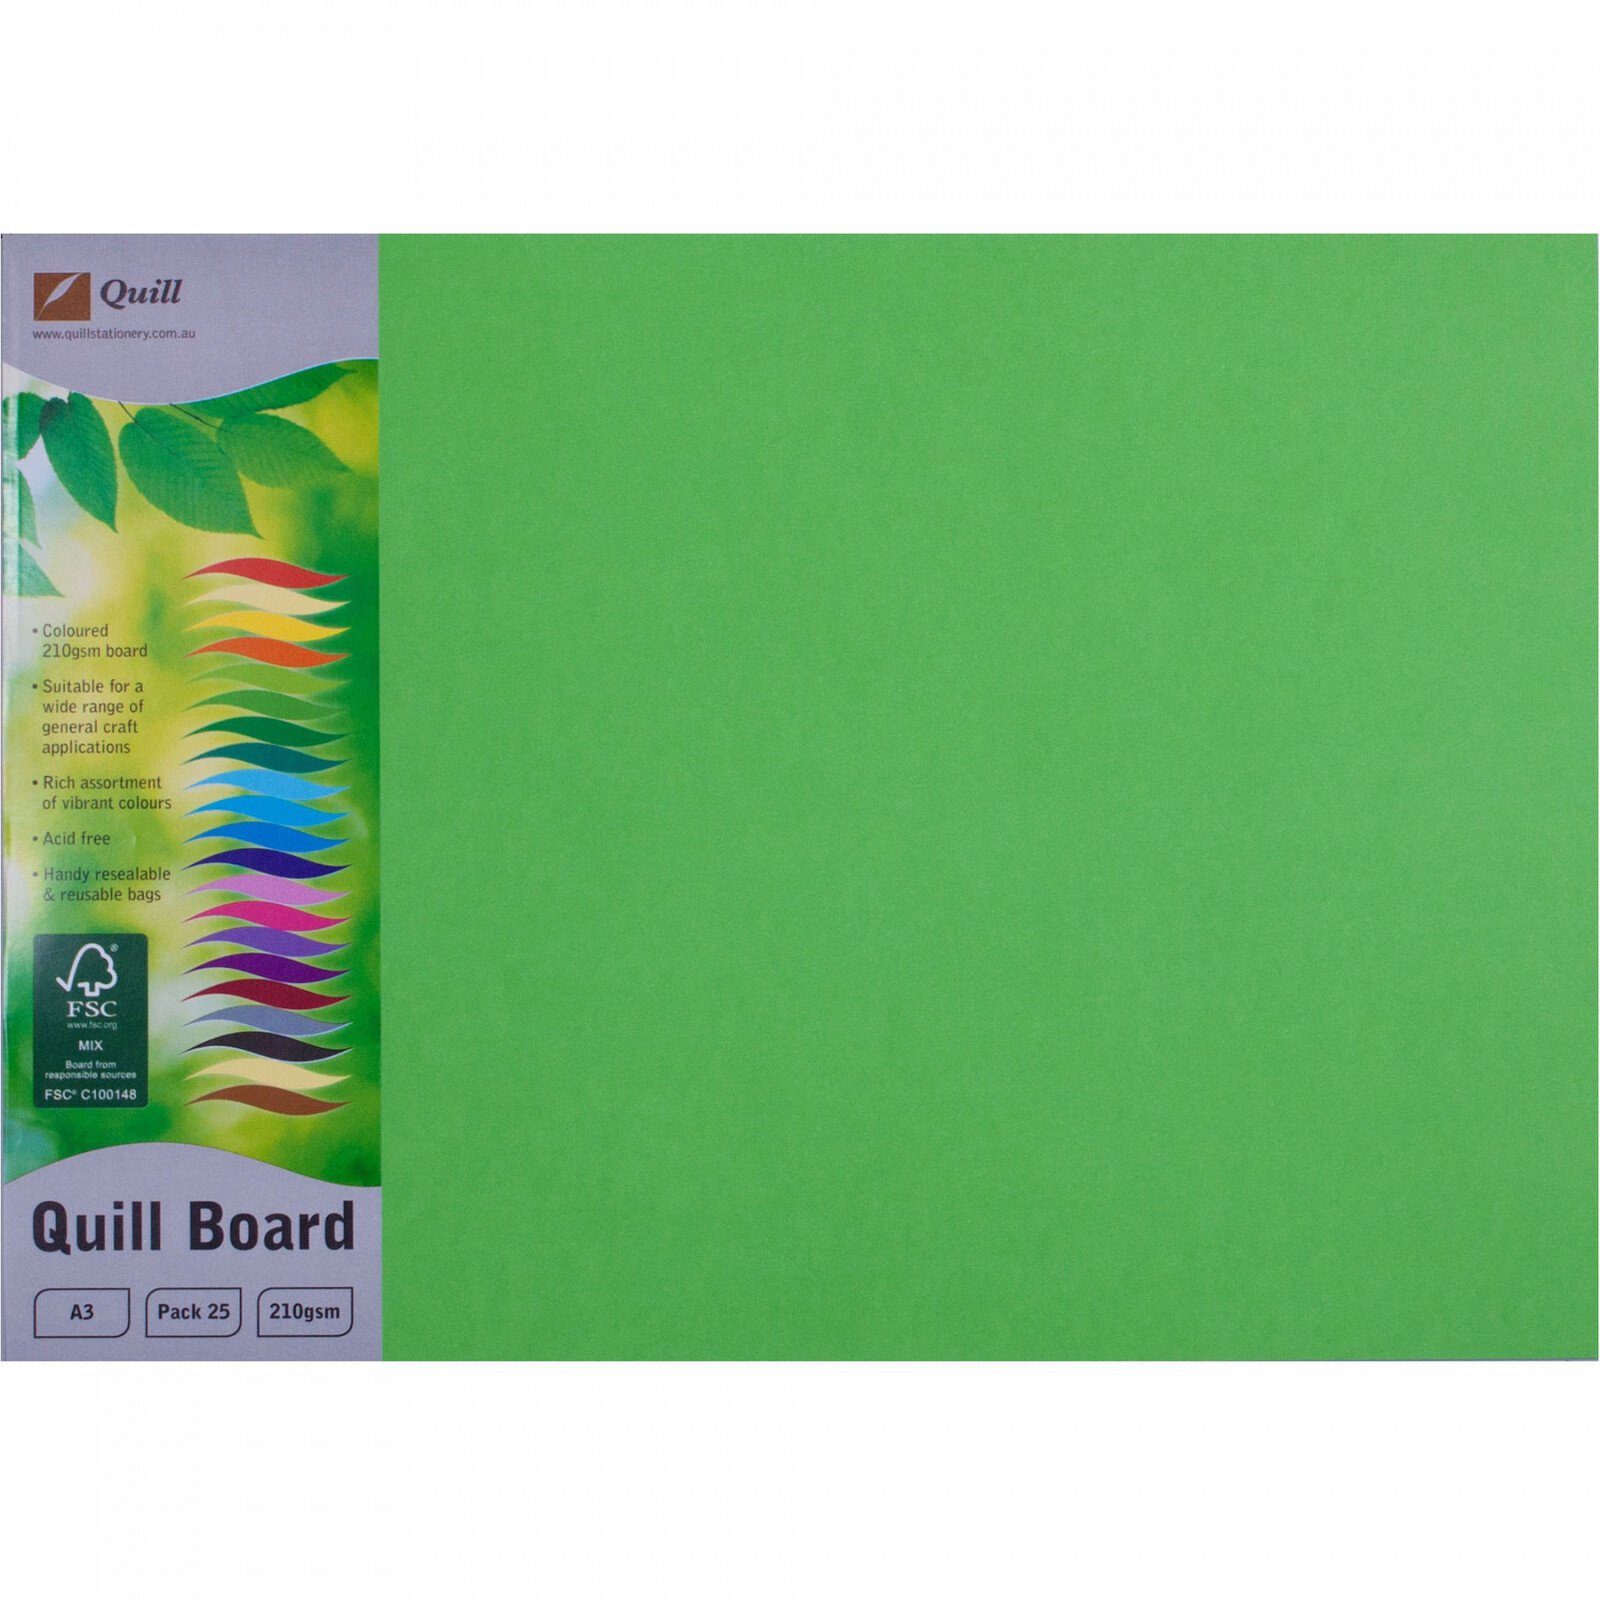 A3 Size Paper, Quill Paper Buying Guide